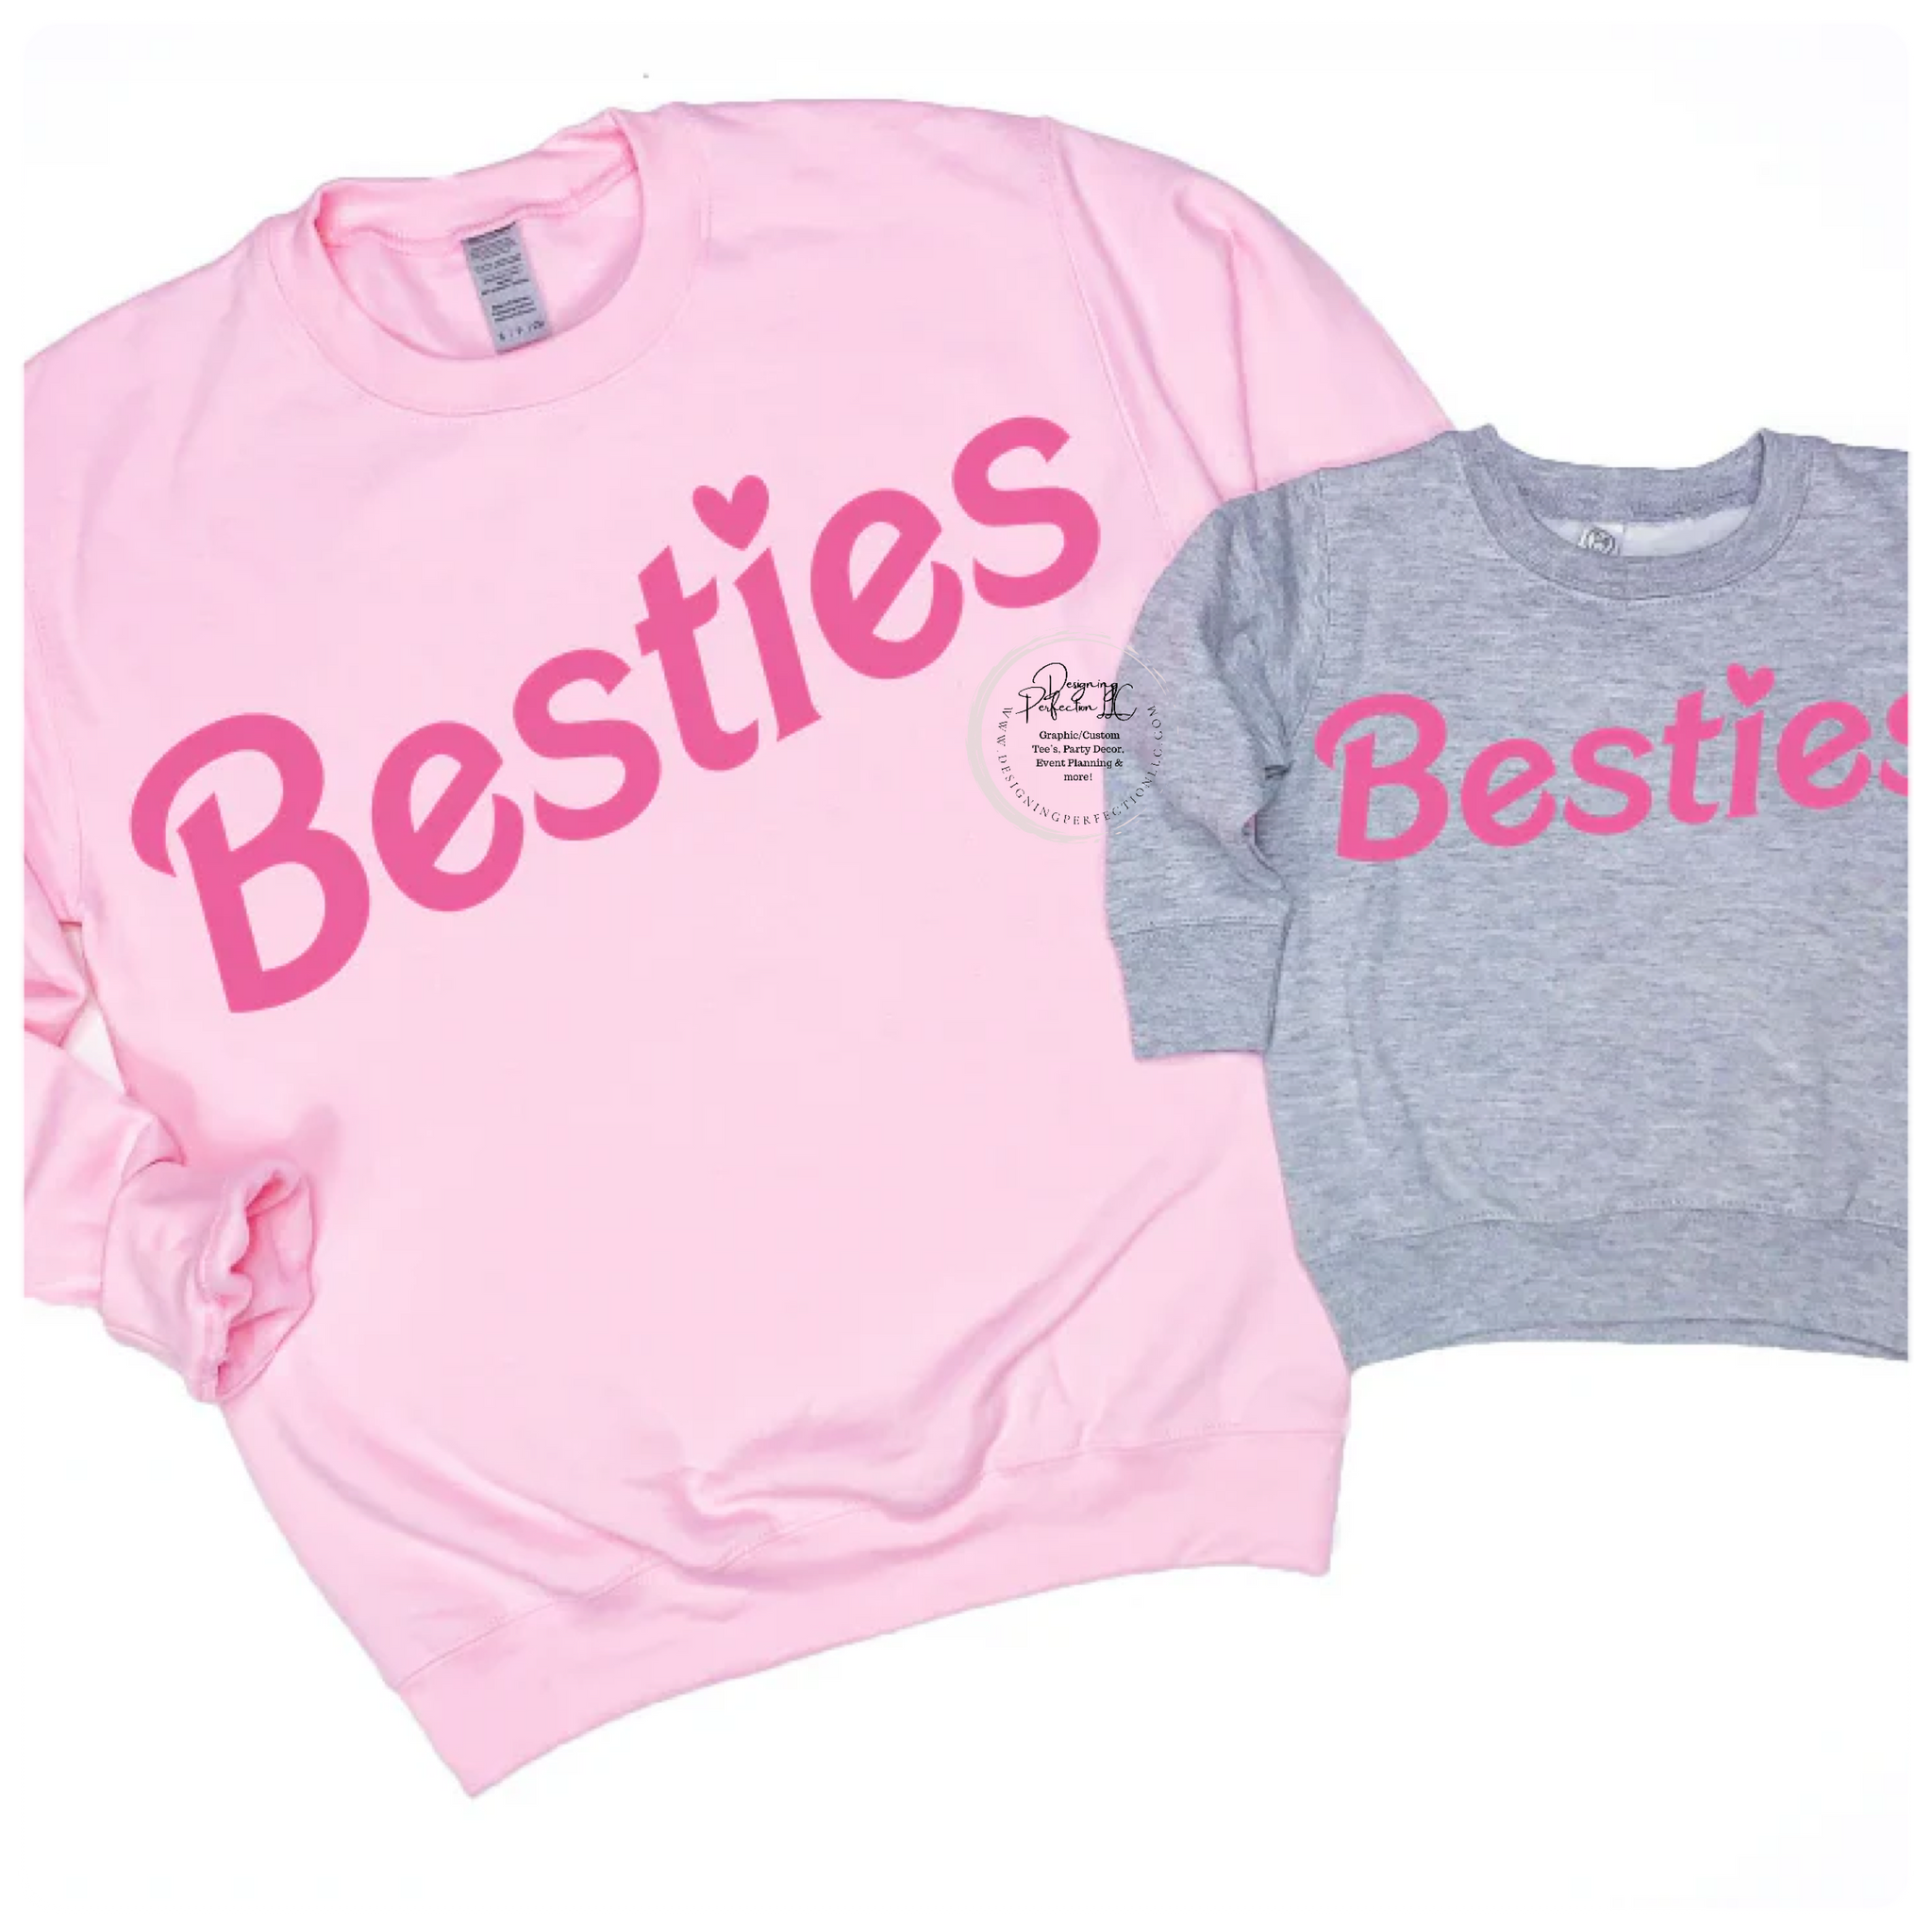 Besties - YOUTH SIZE- On tee, additional options on drop-down